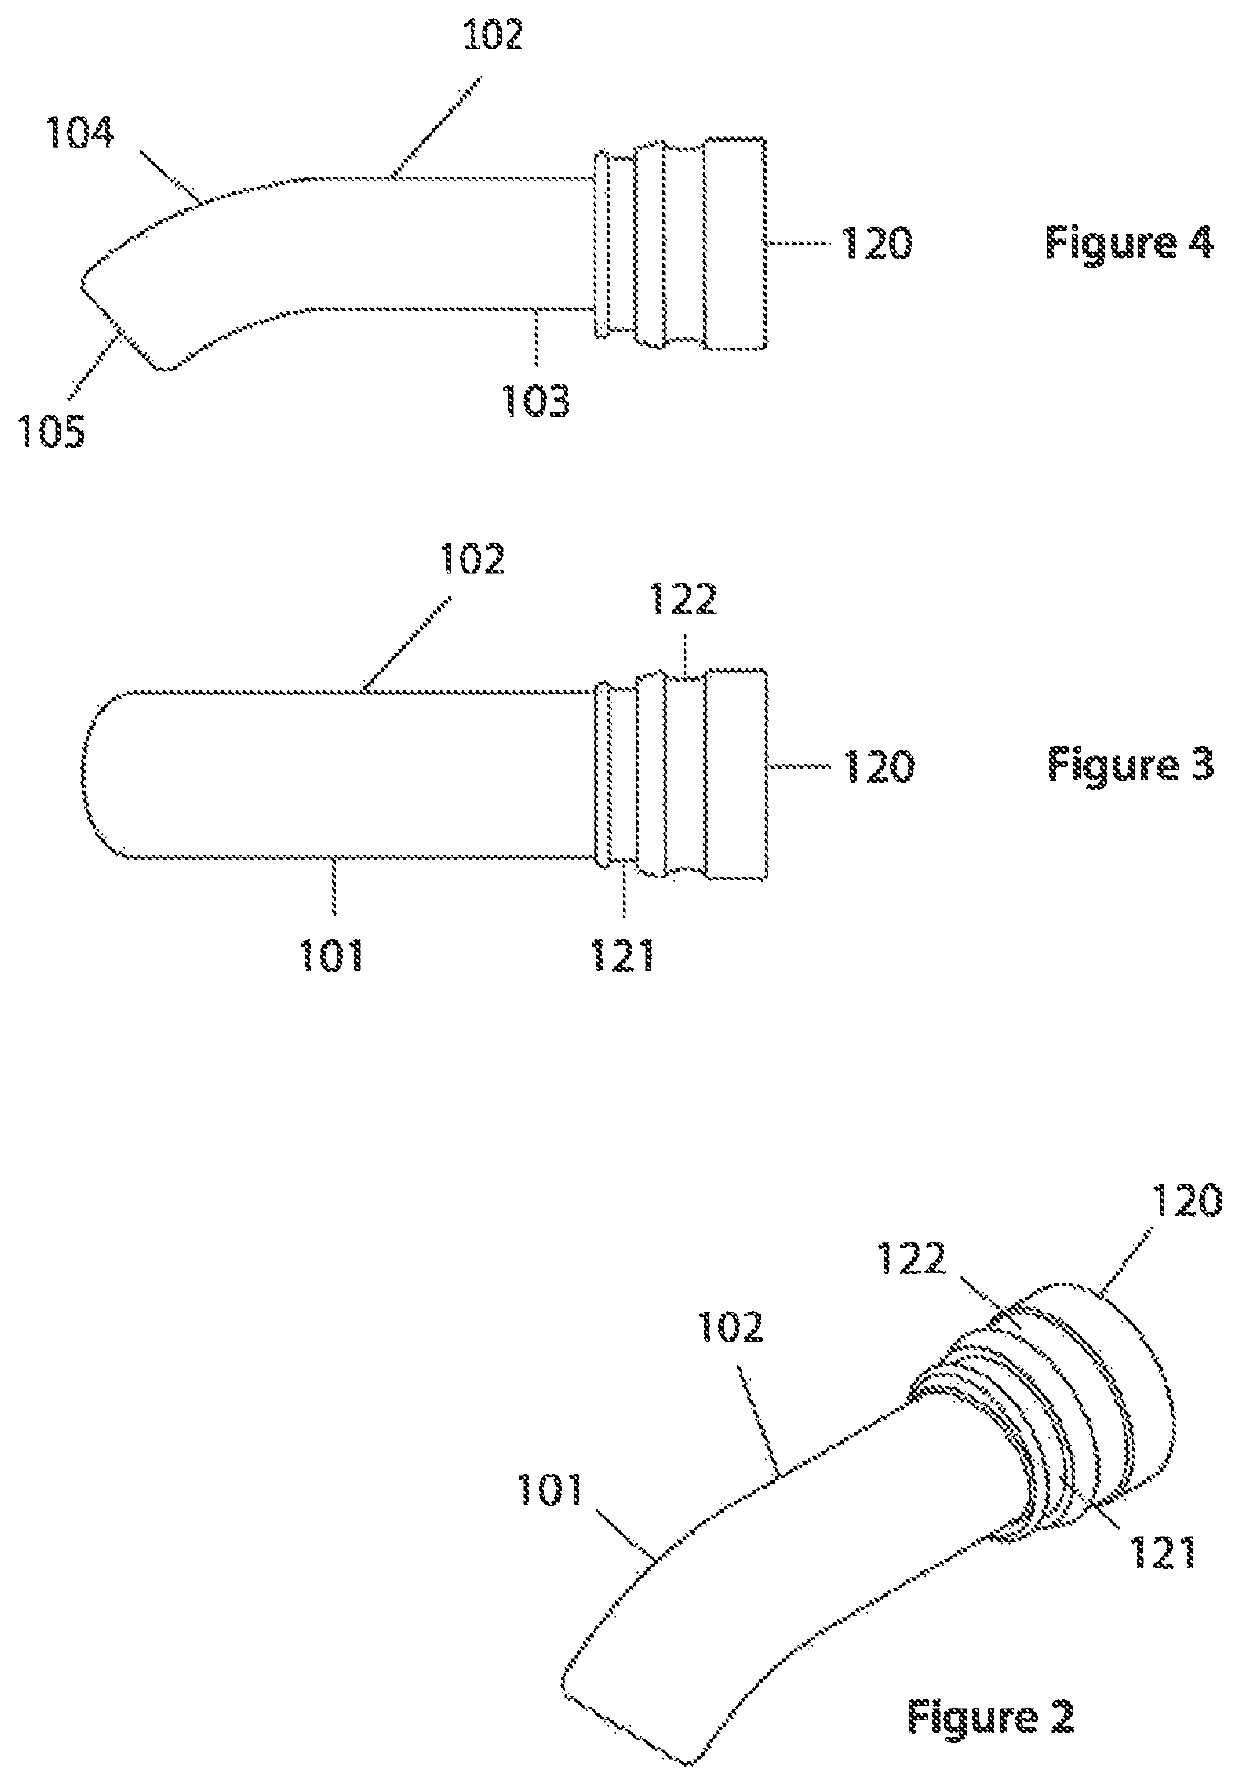 Sealing mechanism for anaesthetic airway devices